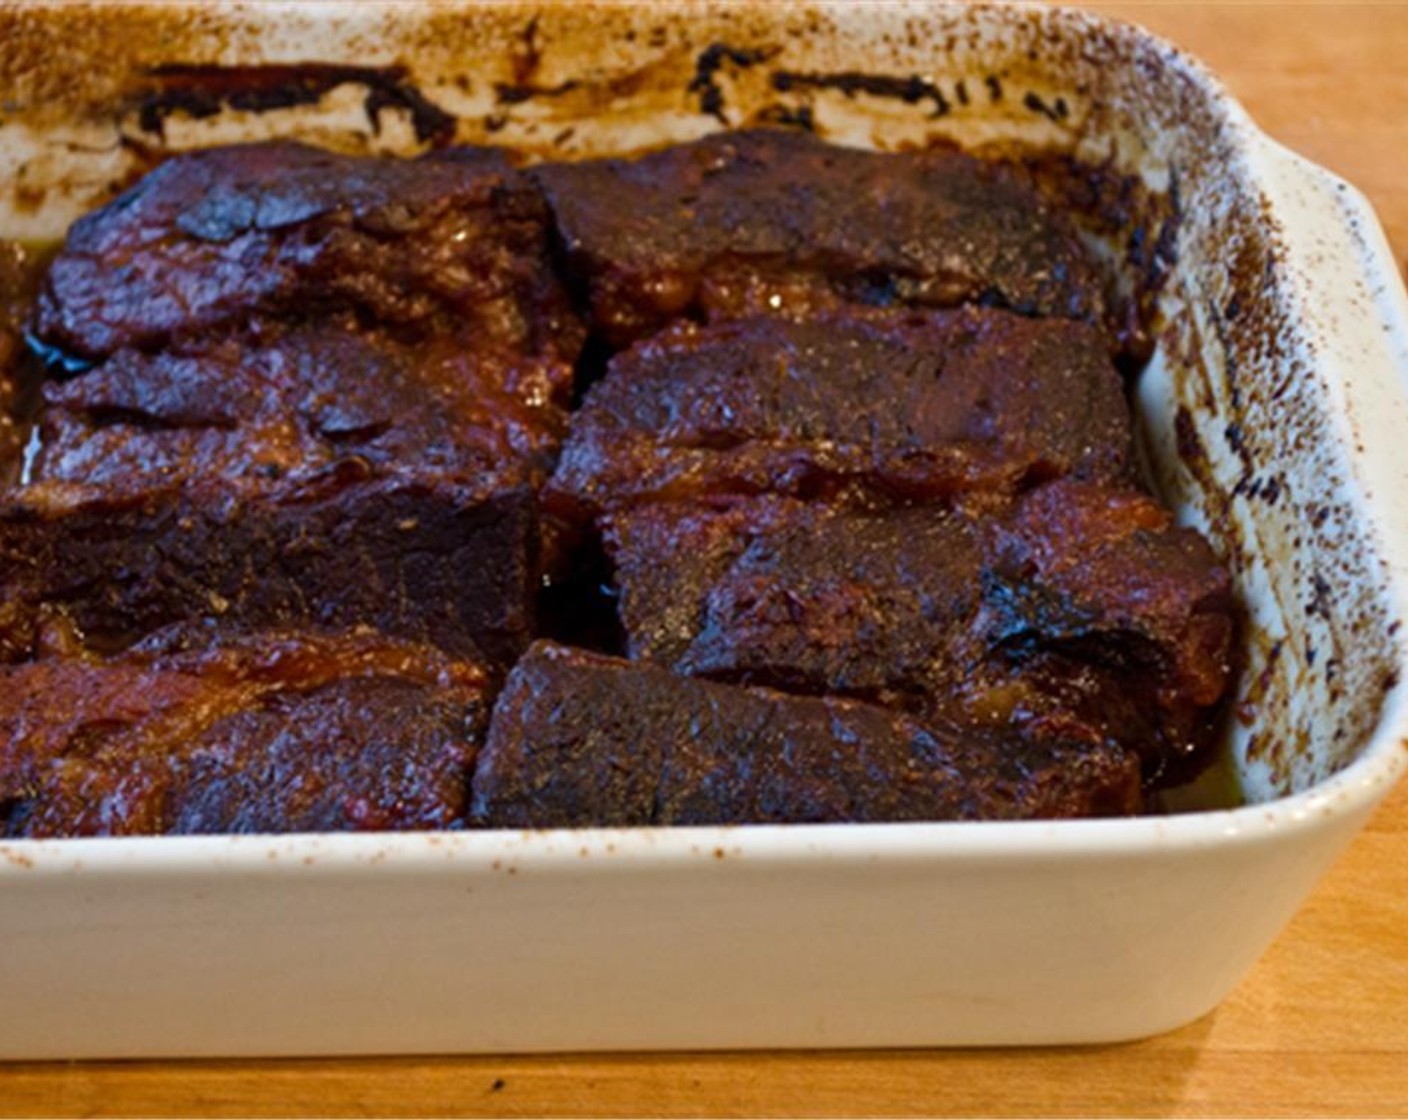 step 7 Cook for 30 minutes more, uncovered, until the meat is tender and browned. Cut off any excess fat that remains around the short ribs. Transfer the short ribs to a serving platter. Discard the cooking liquid, as it will be very greasy.